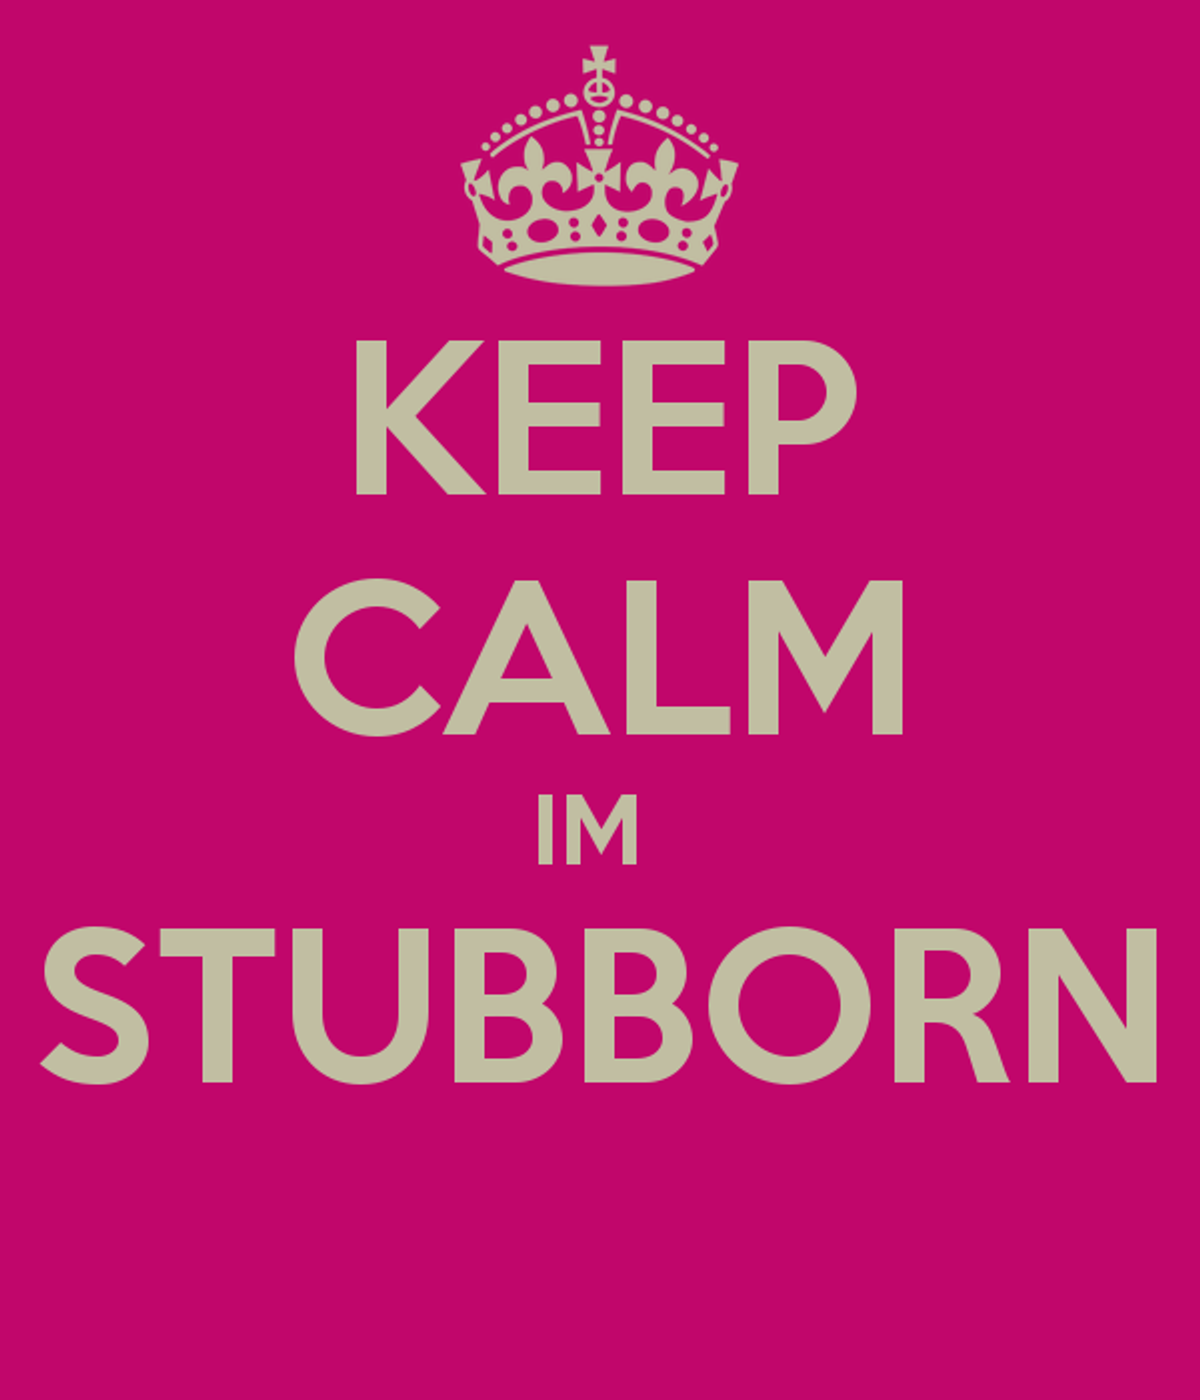 The Most Common Problems Of Stubborn People